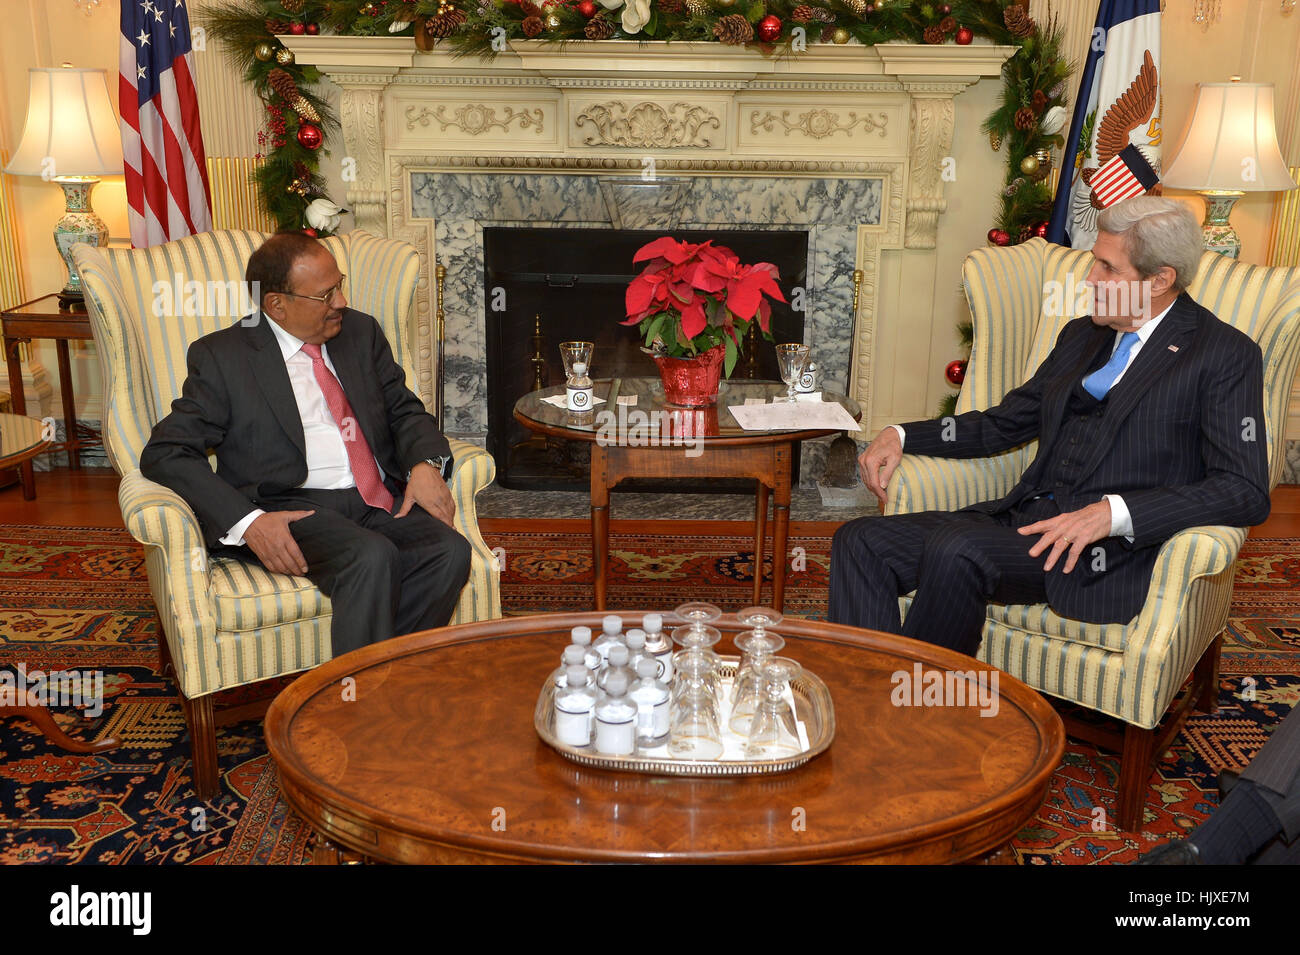 U.S. Secretary of State John Kerry meets with Indian National Security Advisor Ajit Doval, at the U.S. Department of State in Washington, D.C., on December 20, 2016. Stock Photo